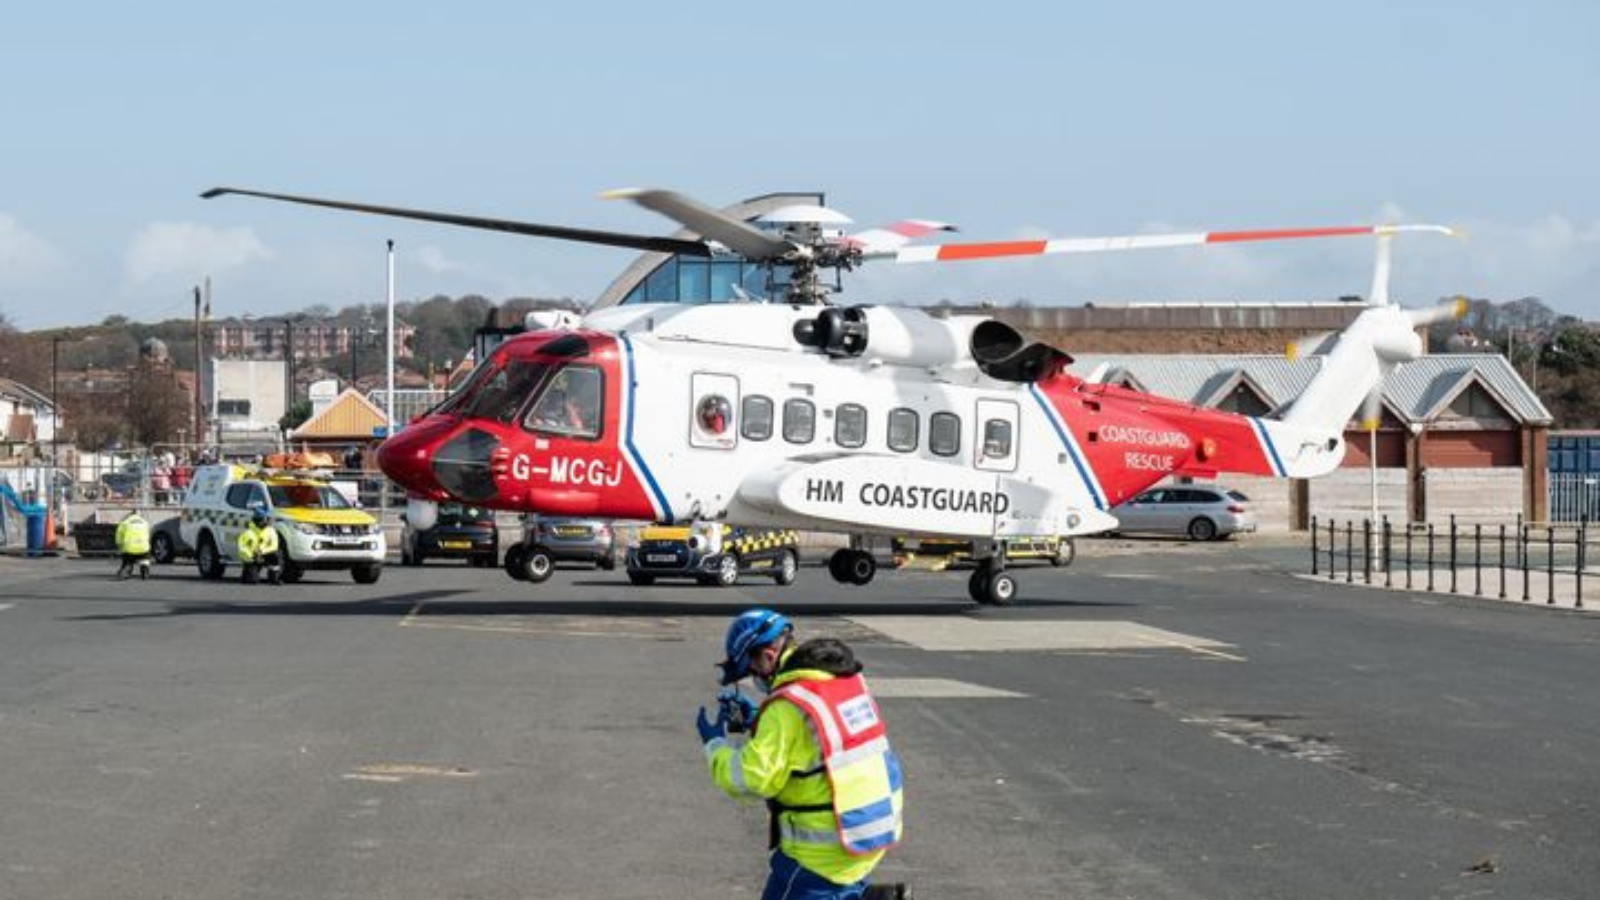 Coastguard rescue helicopter featured image